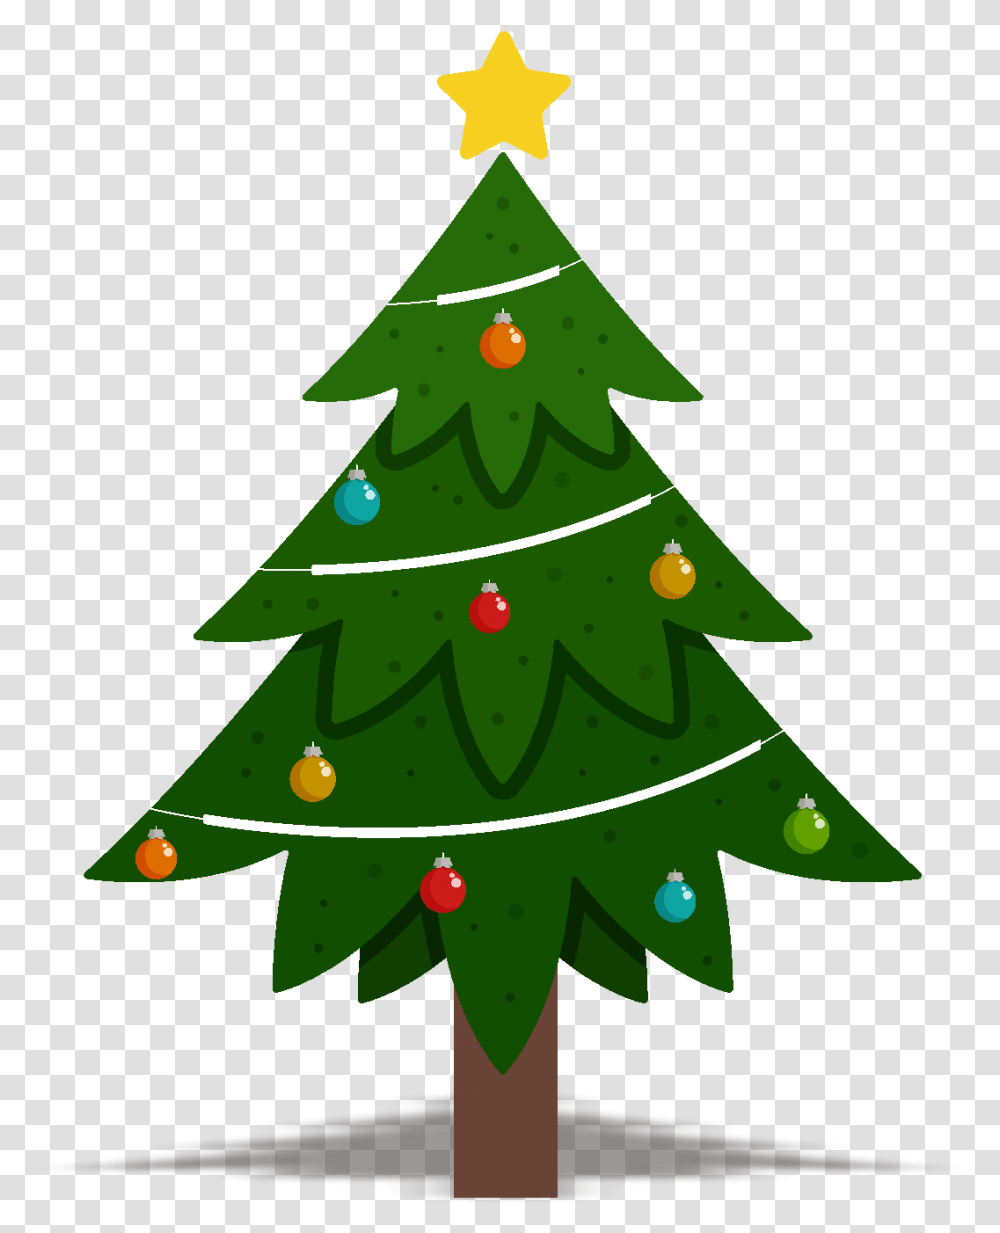 Christmas Tree Design Element Vector And Image, Plant, Ornament, Star Symbol Transparent Png